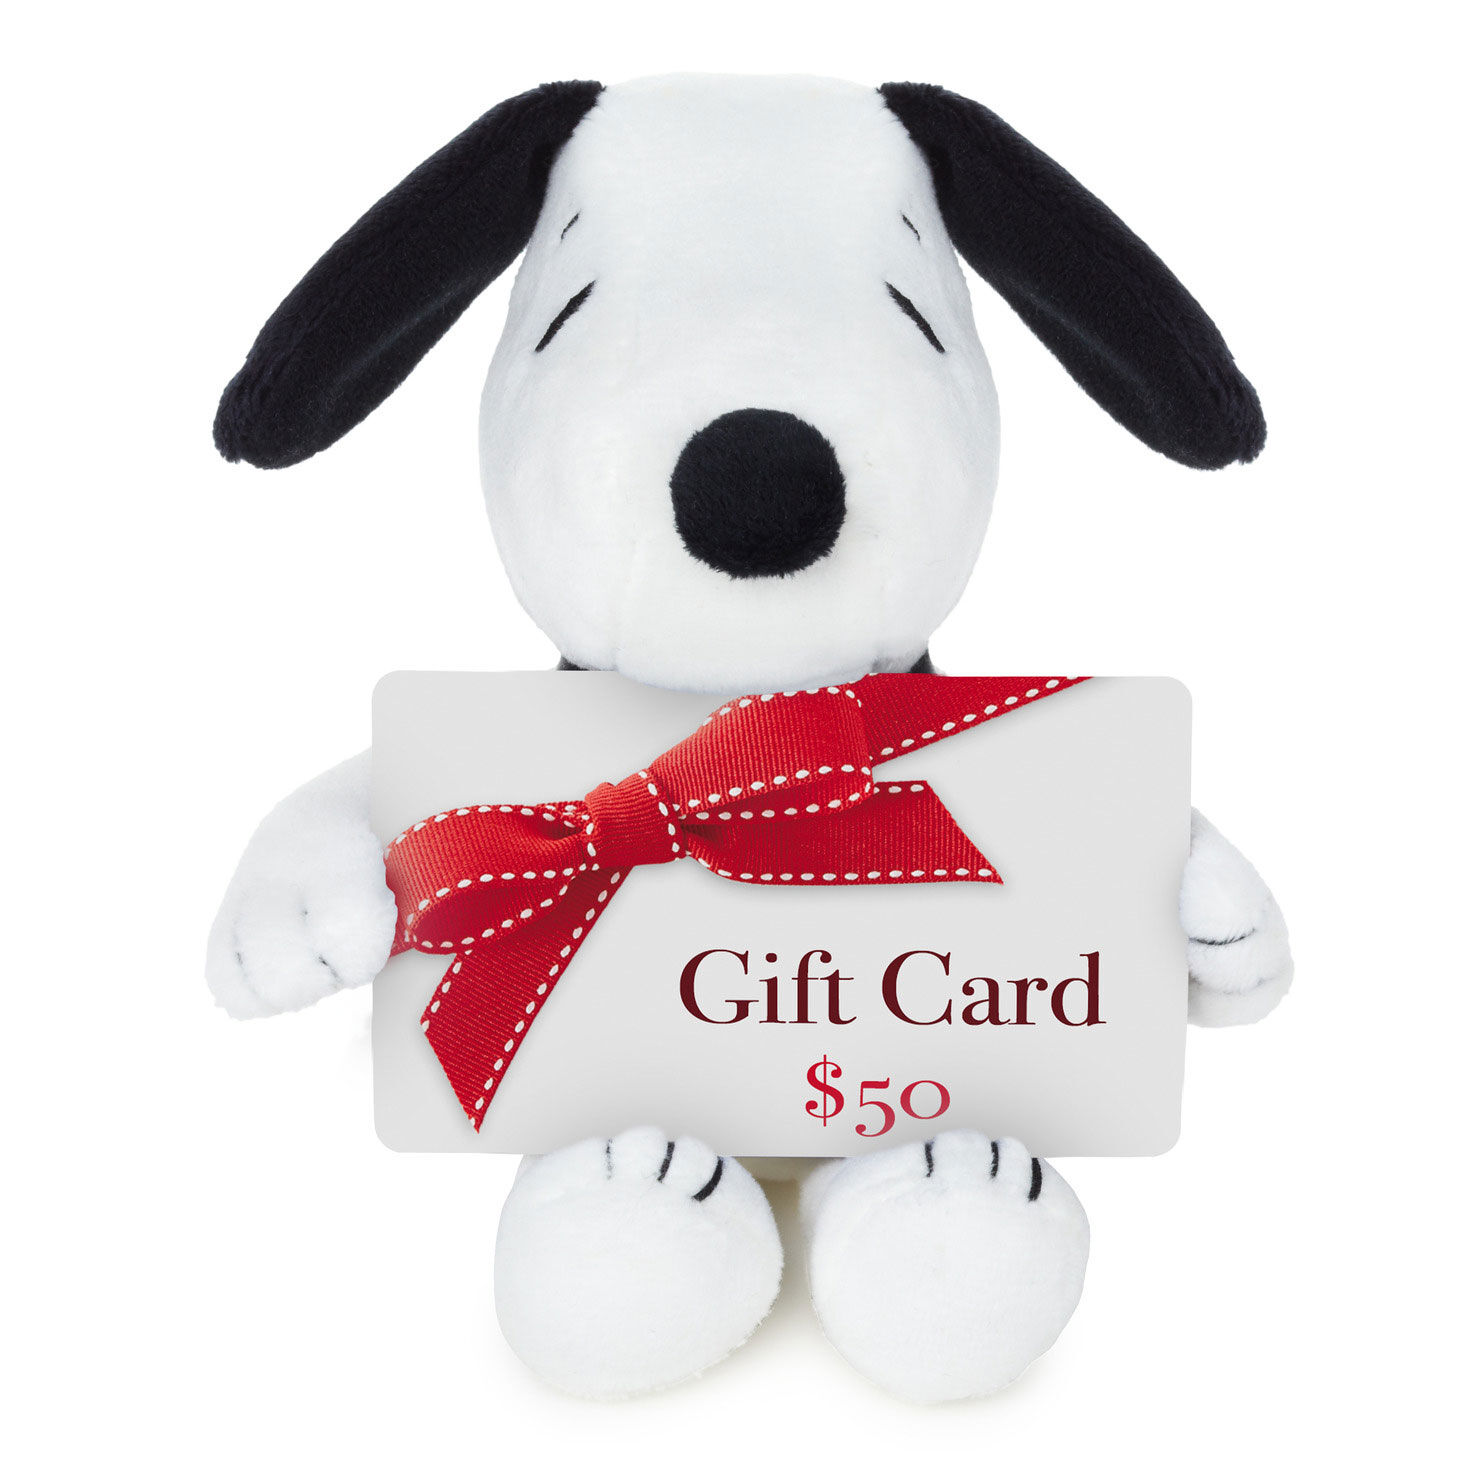 Peanuts® Snoopy Plush Gift Card Holder, 4.2" for only USD 9.99 | Hallmark